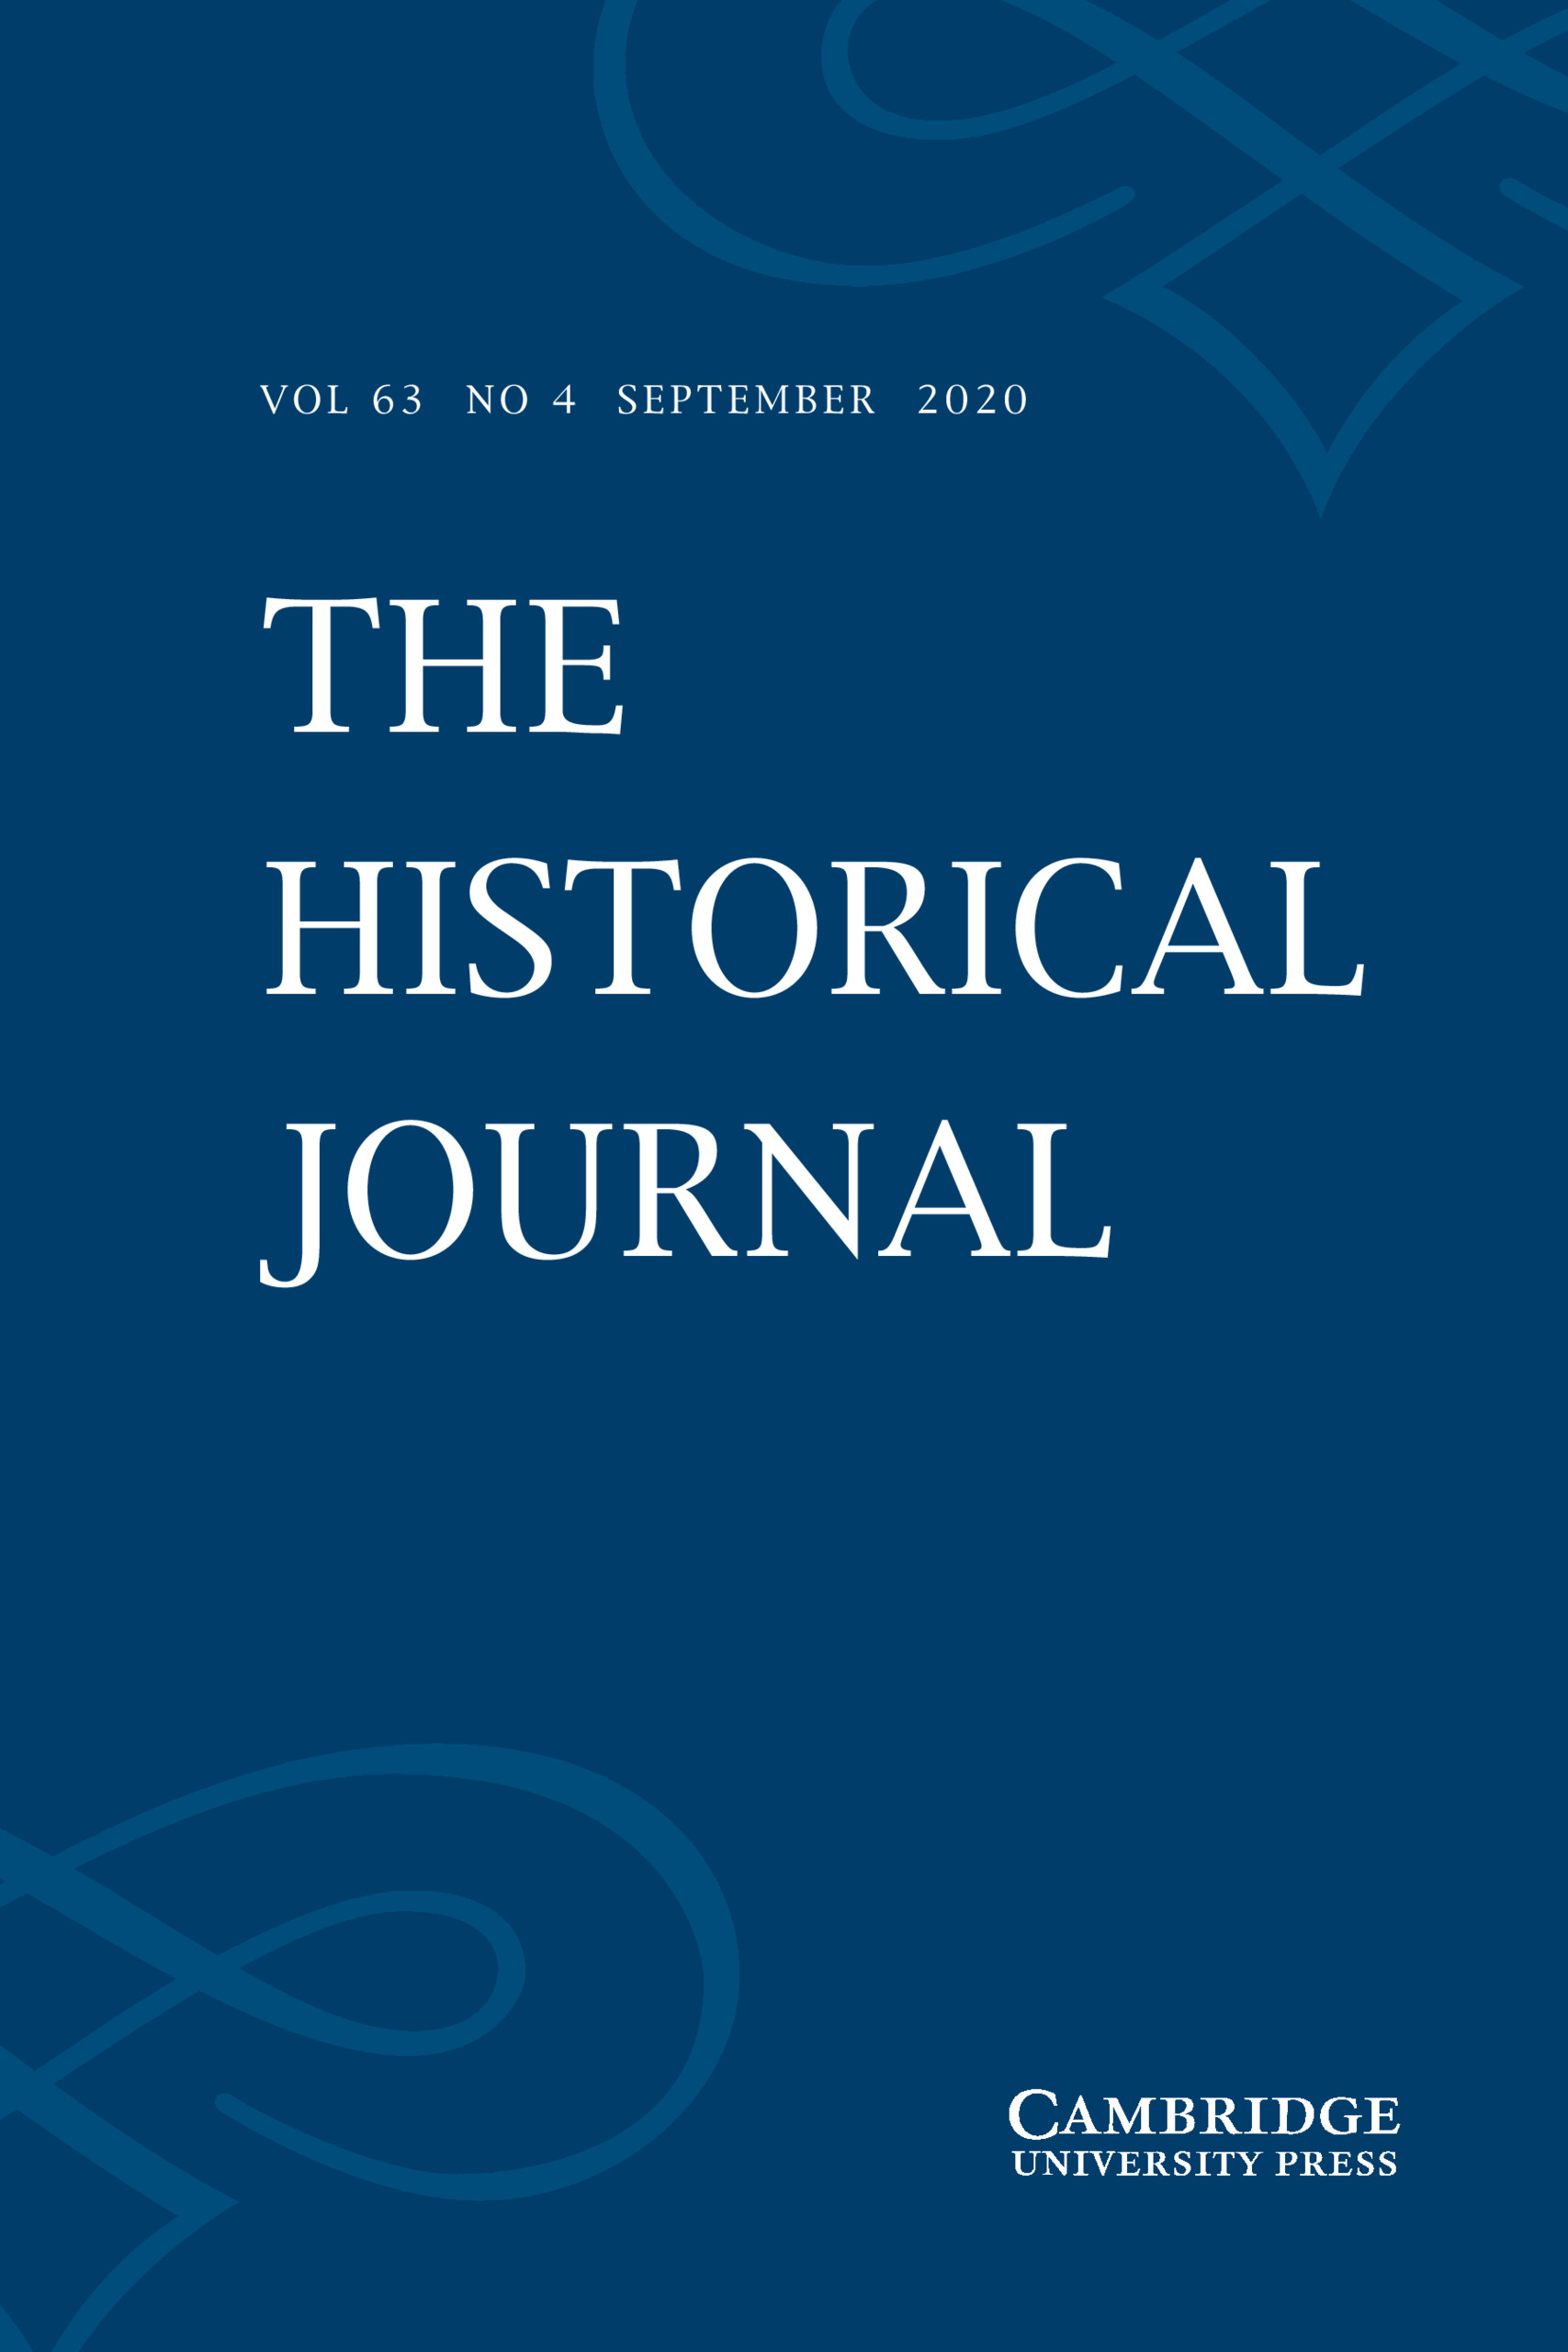 a journal of historical research and writing